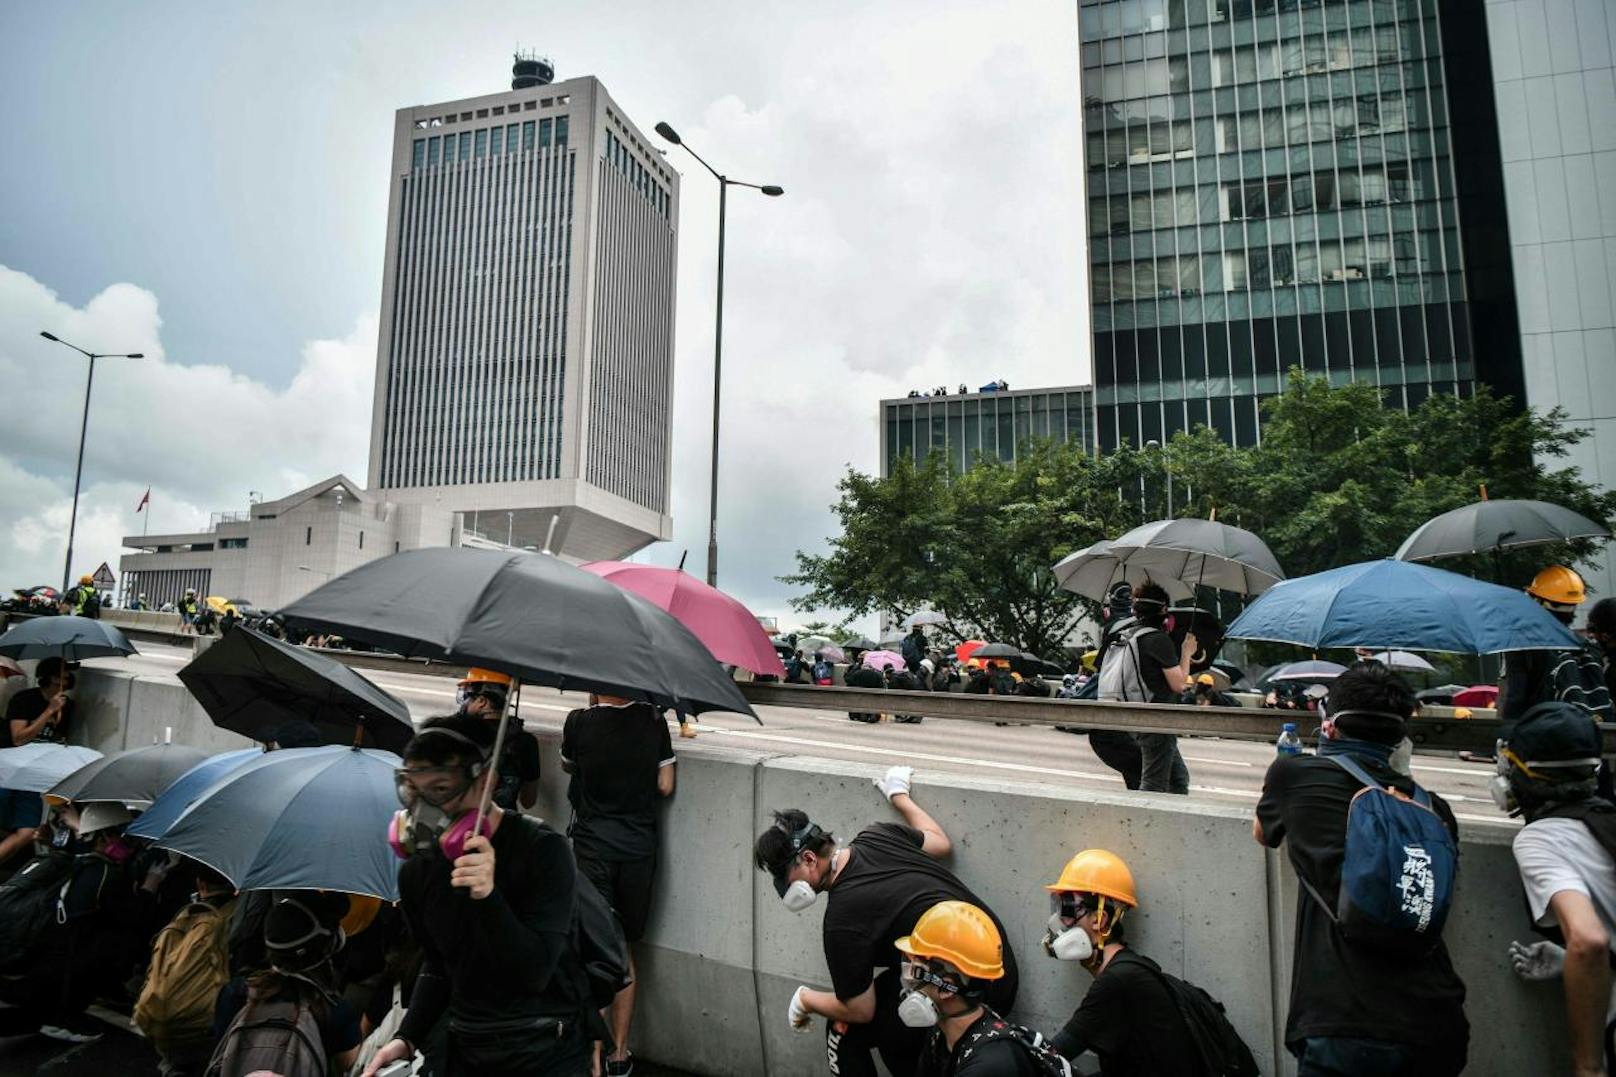 Download von www.picturedesk.com am 31.08.2019 (15:33). 
Protesters react during clashes with police outside the government headquarters in Hong Kong on August 31, 2019. - Chaos engulfed Hong Kong's financial heart on August 31 as police fired tear gas and water cannon at petrol bomb-throwing protesters, who defied a ban on rallying -- and mounting threats from China -- to take to the streets for a 13th straight weekend. (Photo by Anthony WALLACE / AFP) - 20190831_PD2807 - Rechteinfo: Nur für redaktionelle Nutzung! - Editorial Use Only! Werbliche Nutzung nur nach Freigabe!